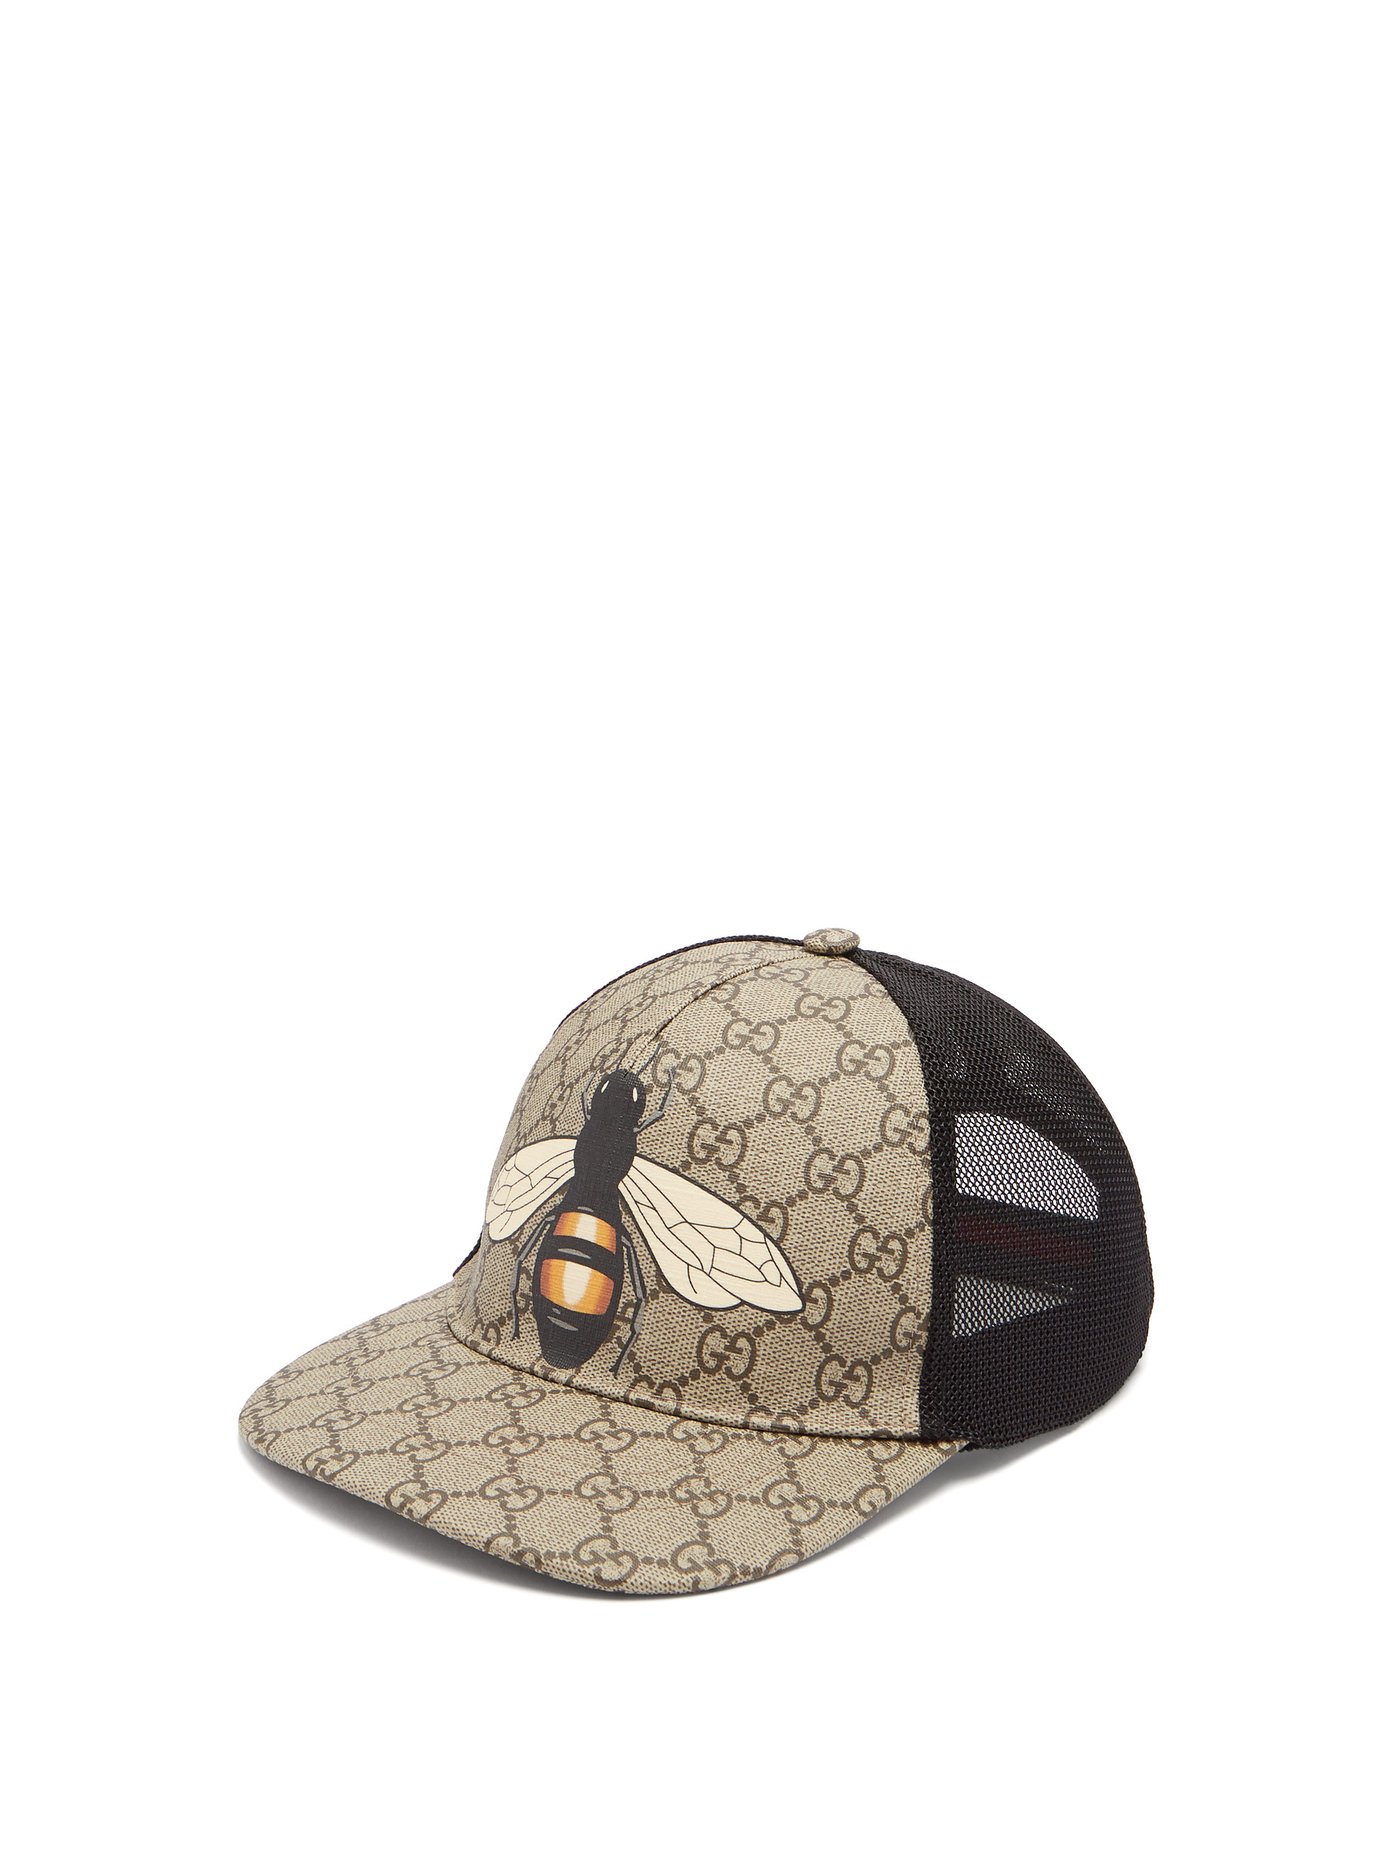 GG and bee-print mesh hat | Gucci 